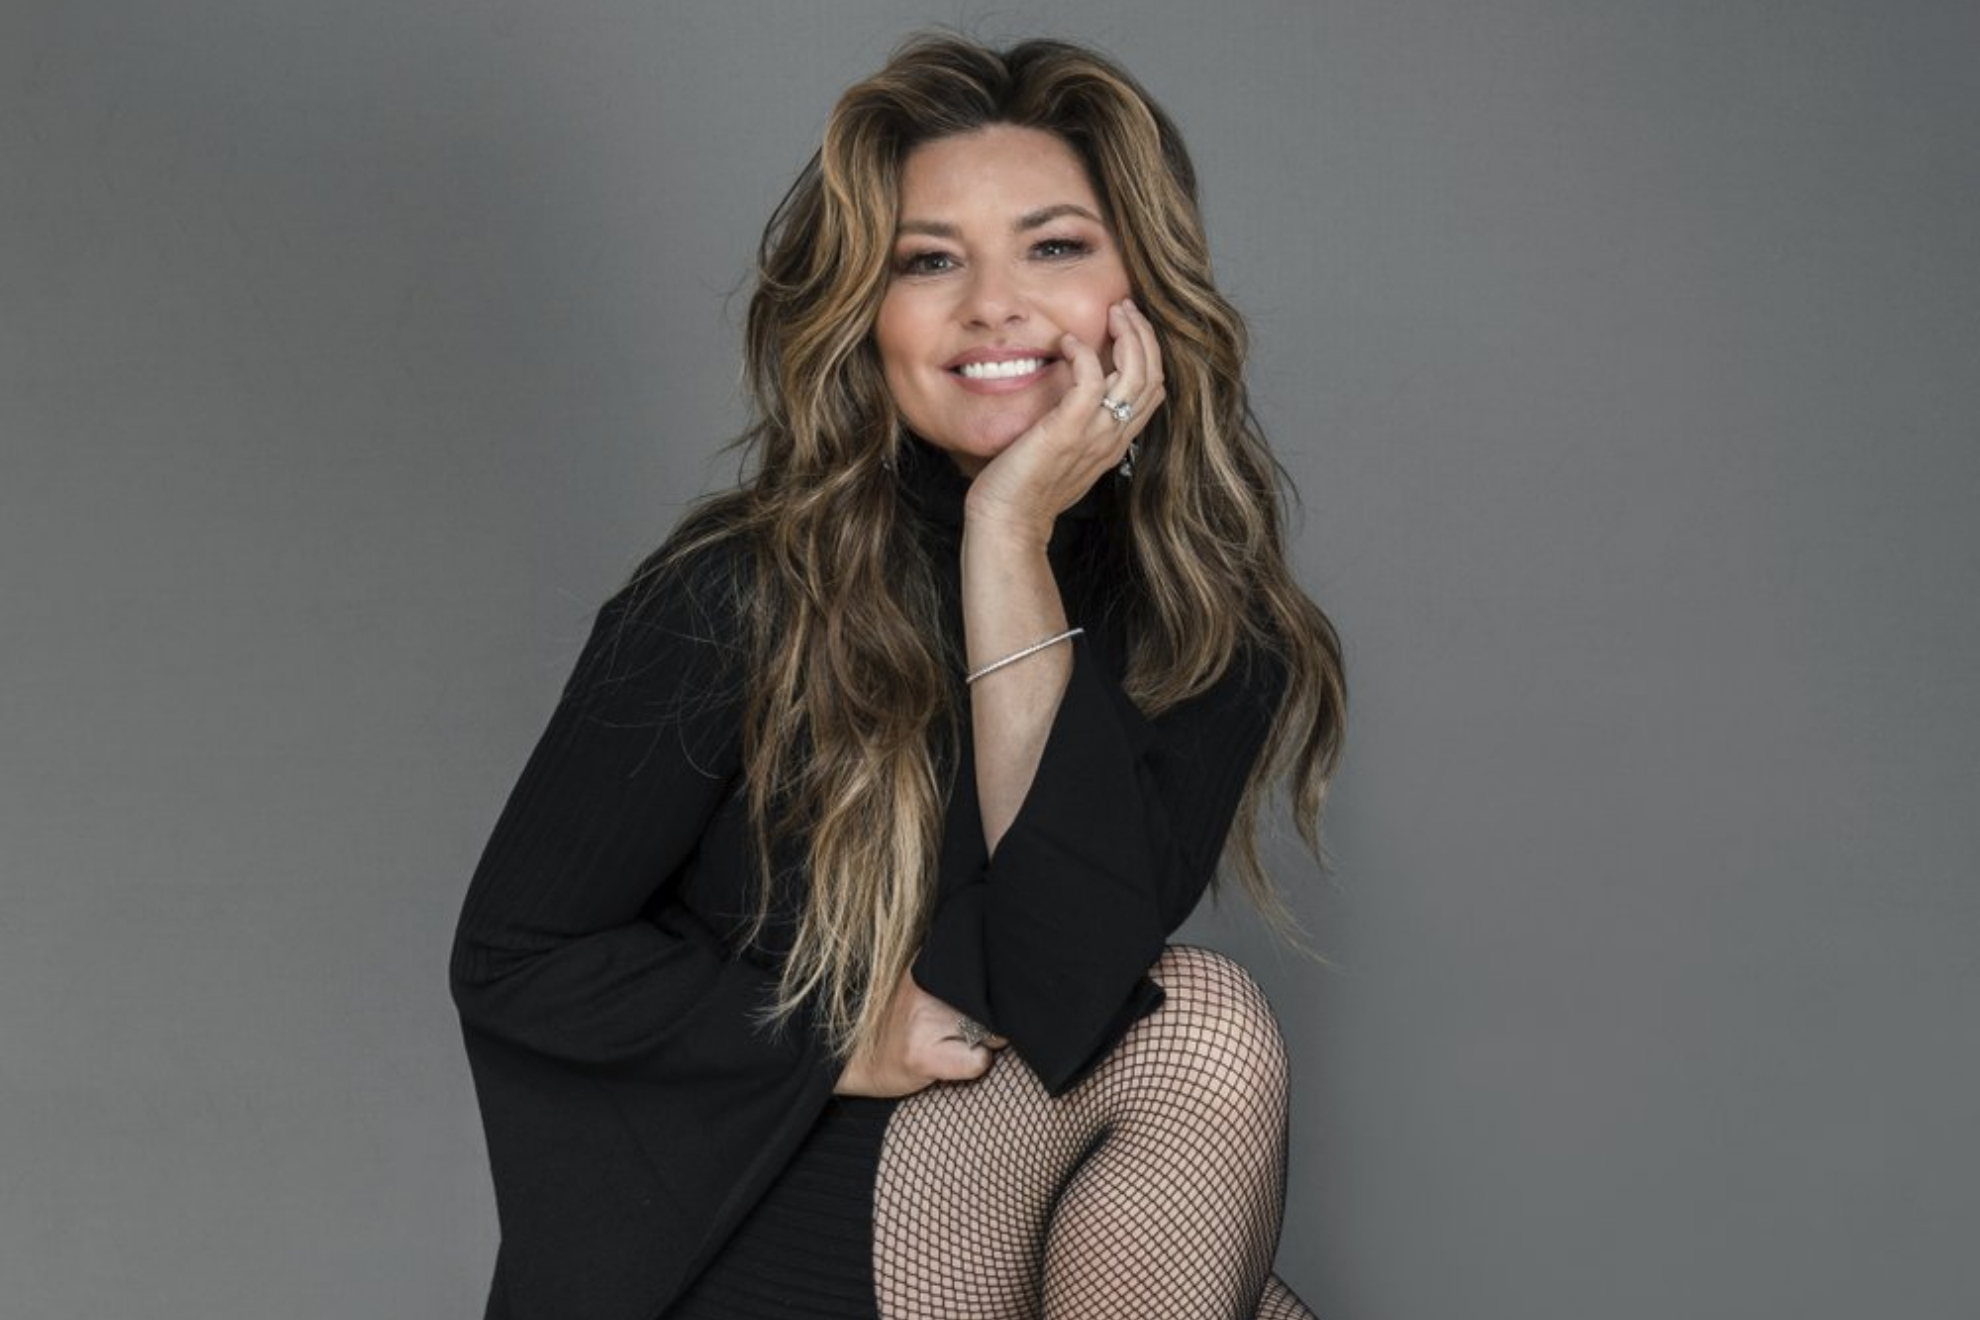 Shania Twain appears during a portrait session in New York.